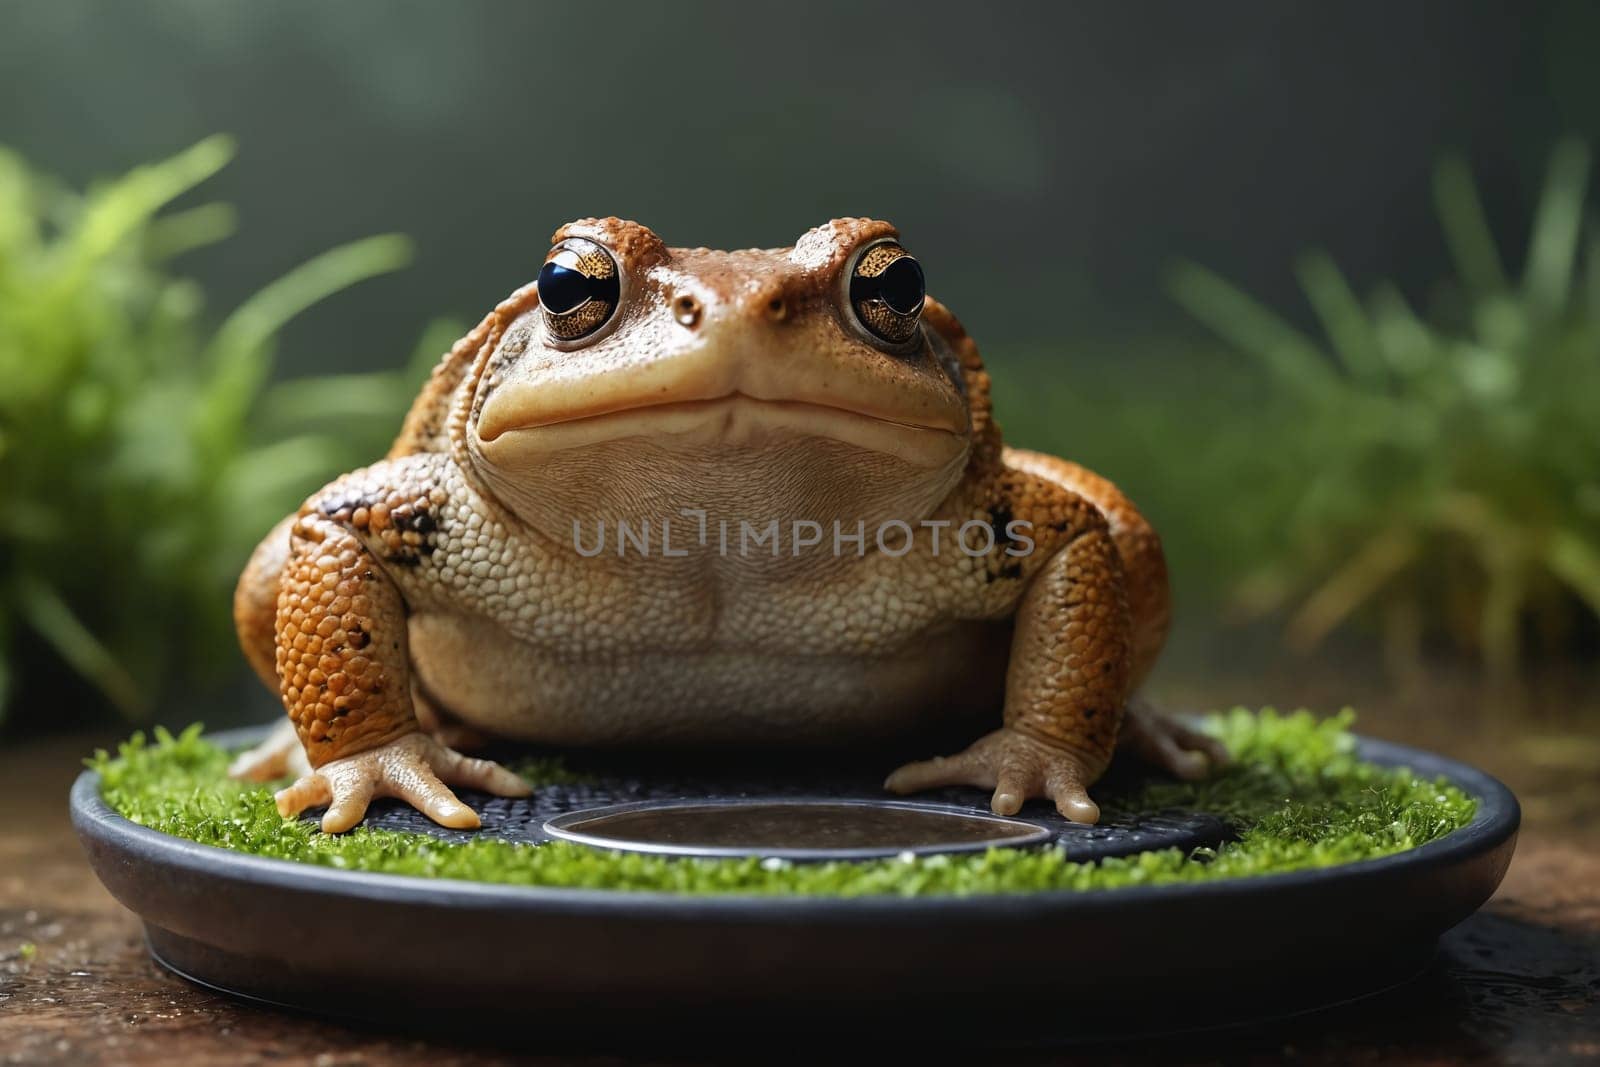 This playful moment captures a green frog's unexpected visit to a metallic weighing scale.